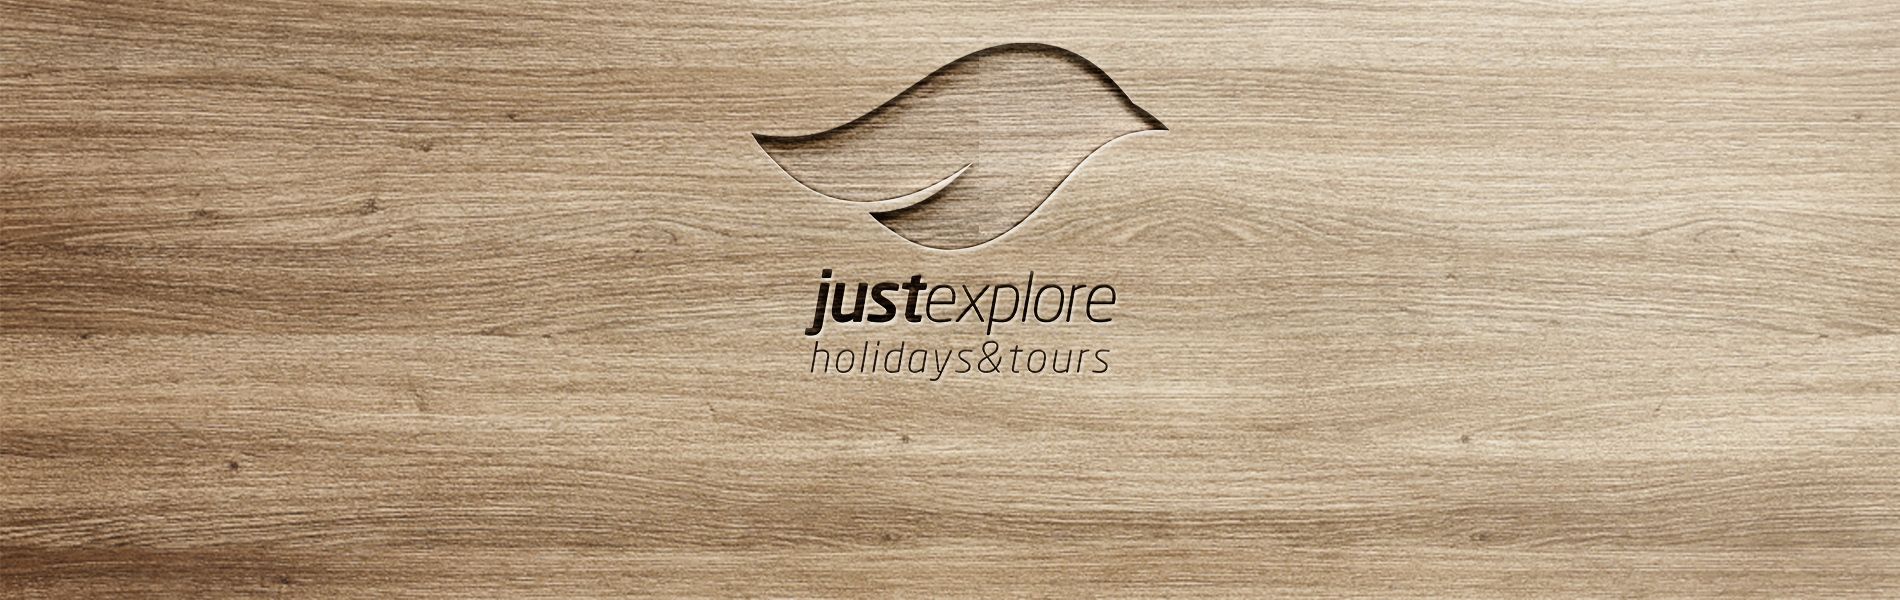 Just Explore Holidays & Tours